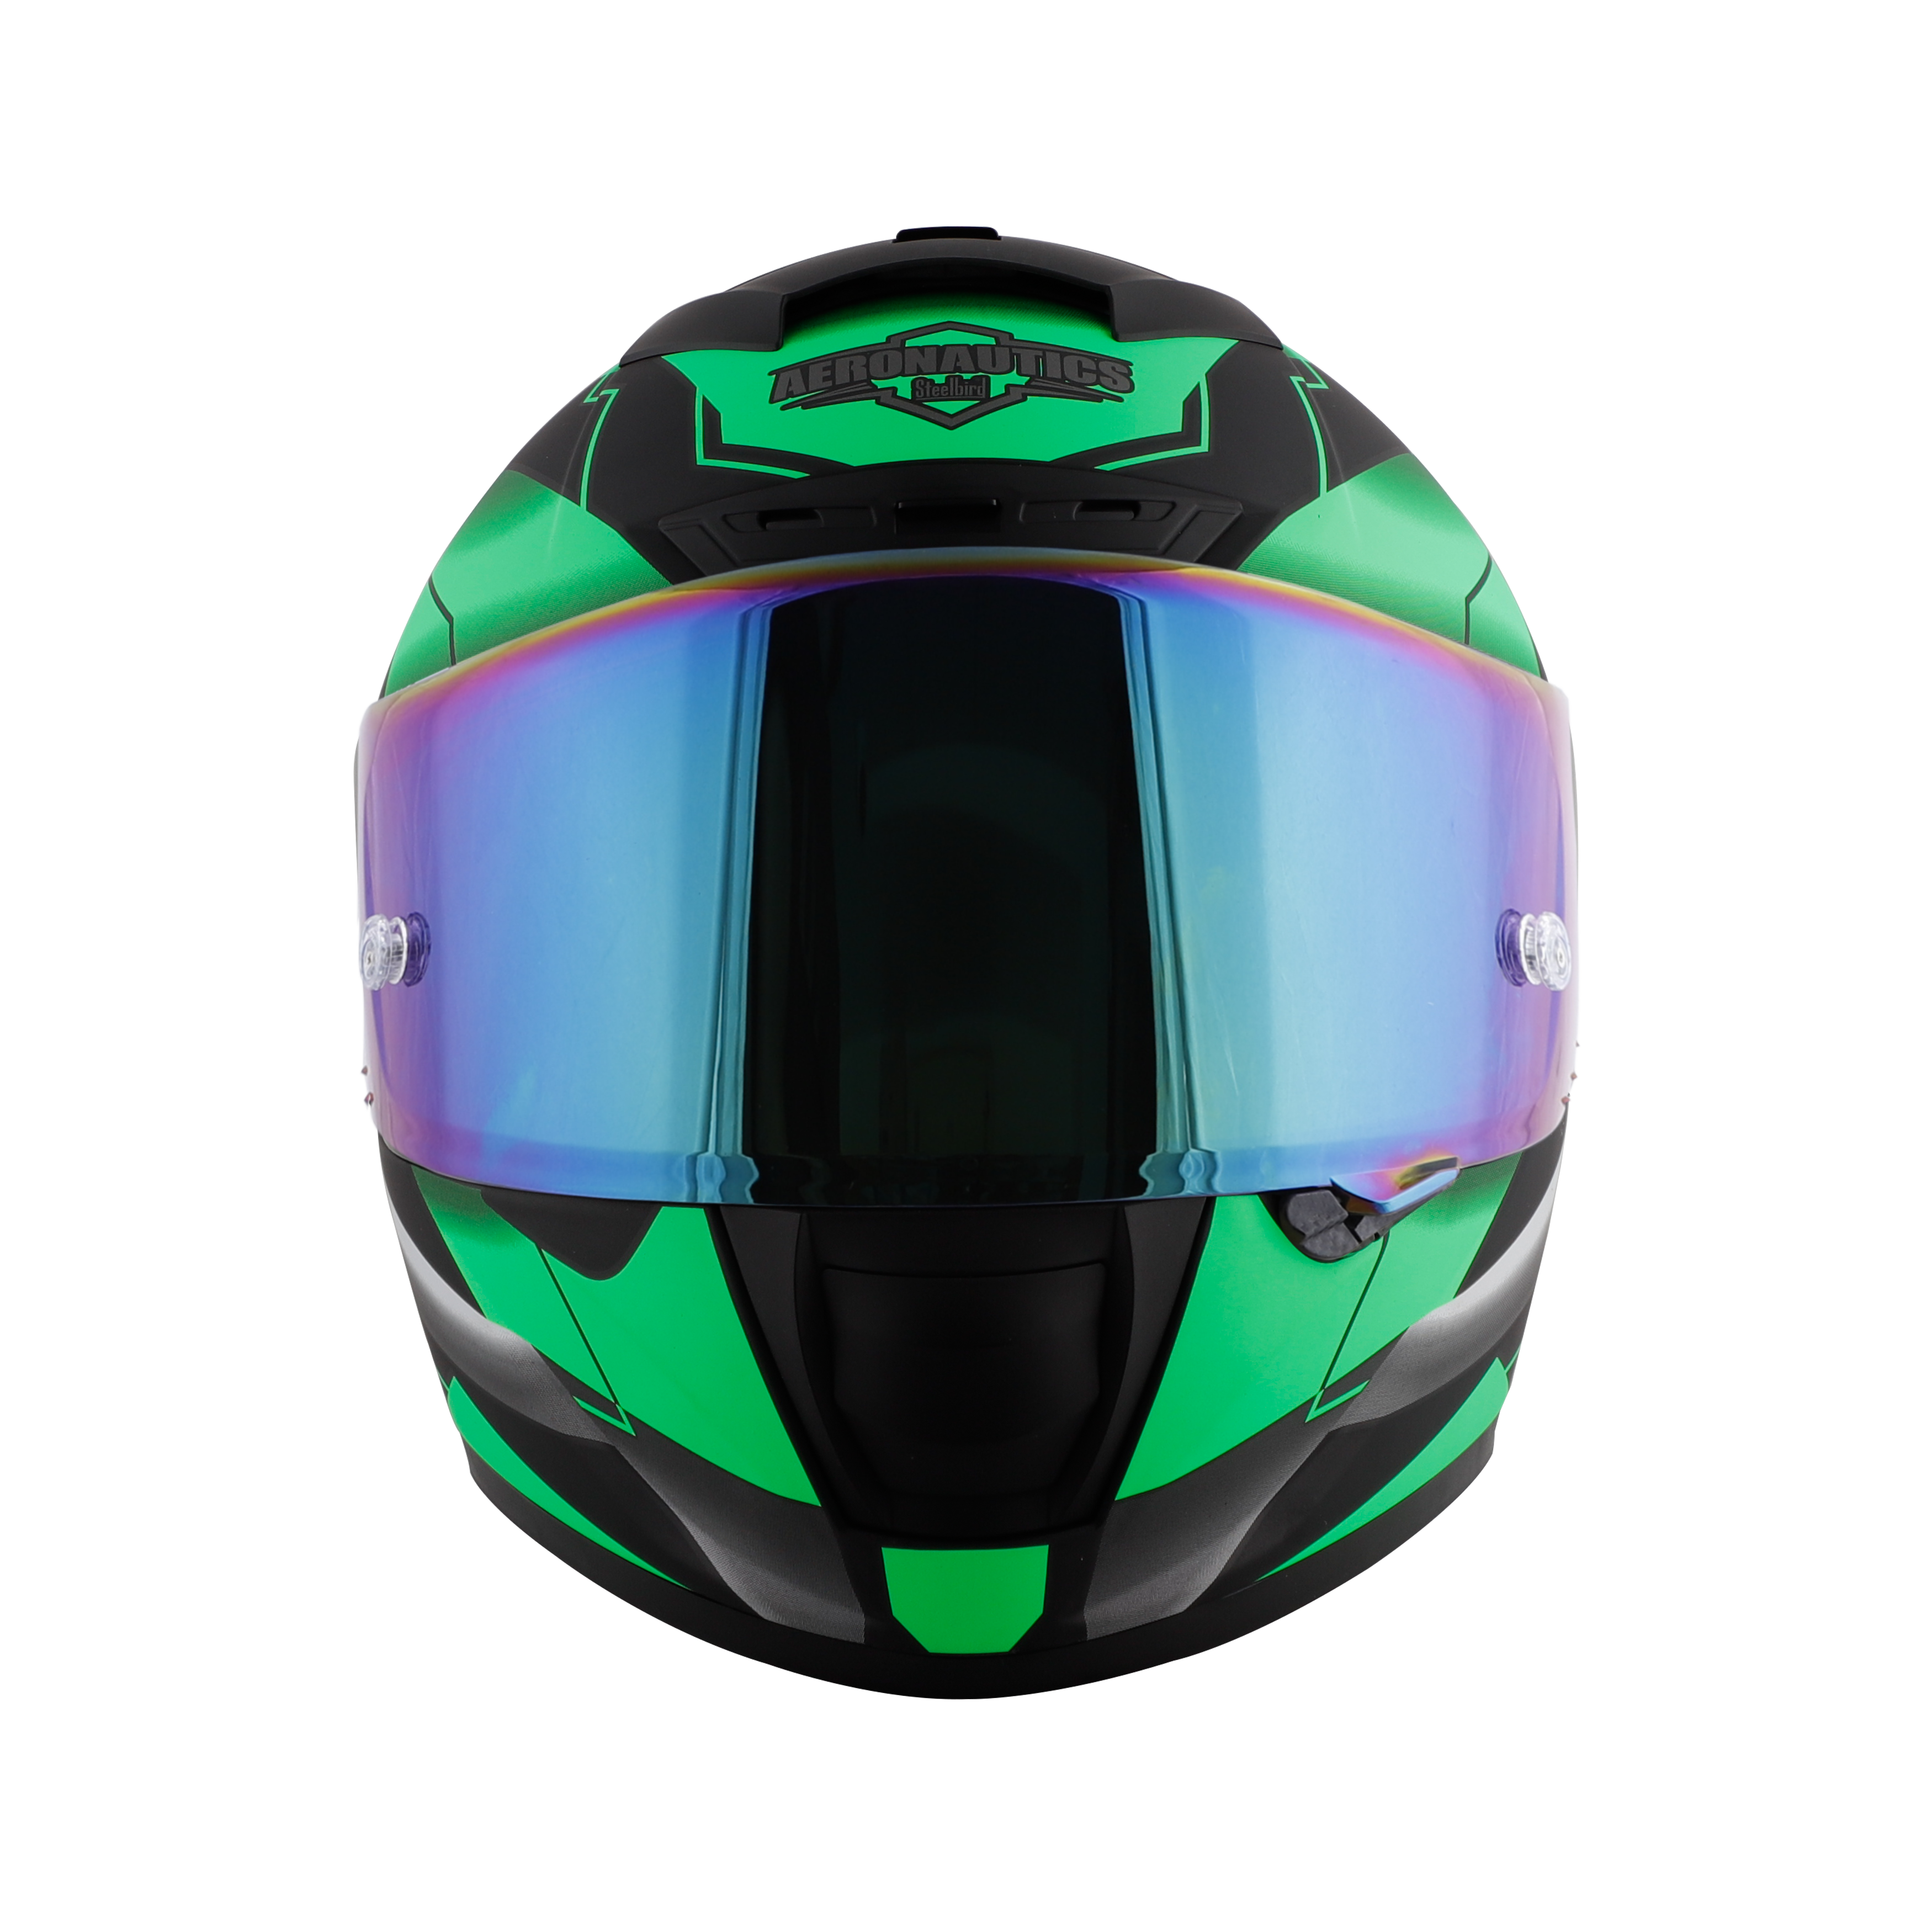 SA-2 METALLIC MAT BLACK WITH FLUO GREEN ( FITTED WITH CLEAR VISOR  EXTRA CHROME RAINBOW VISOR FREE) WITH ANTI-FOG SHIELD HOLDER